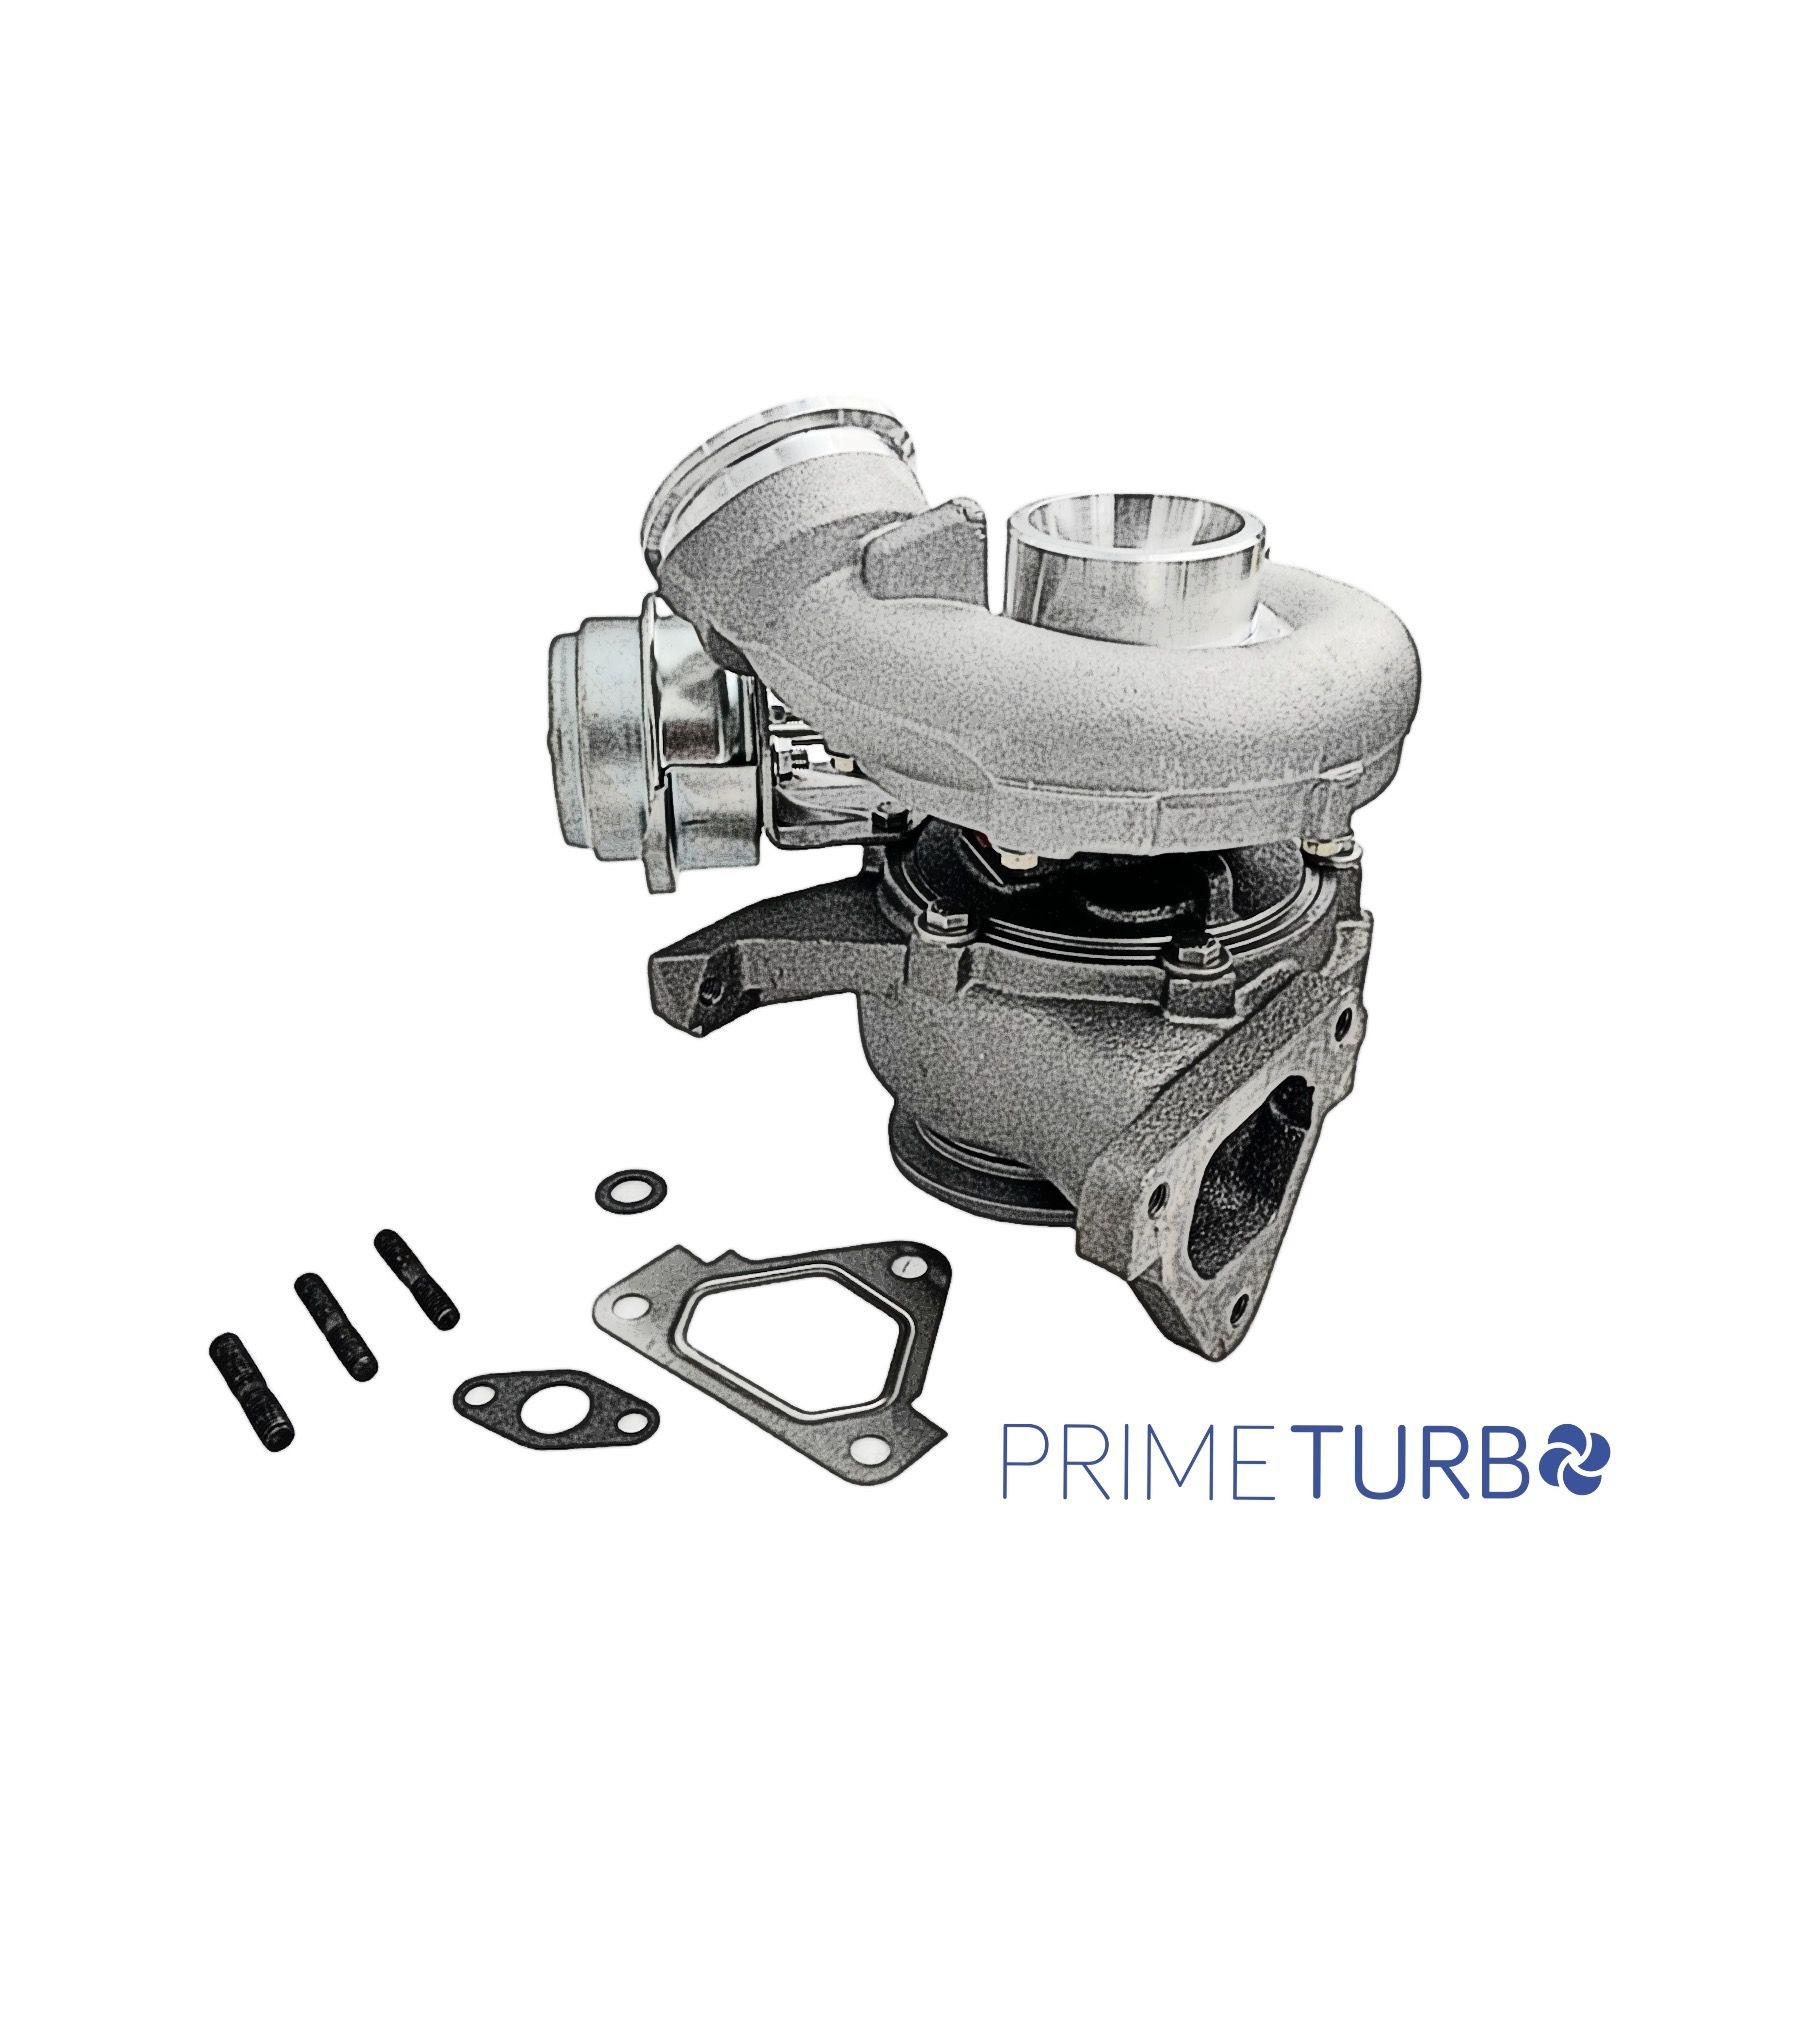 Original V00468T Prime Turbo Turbocharger experience and price